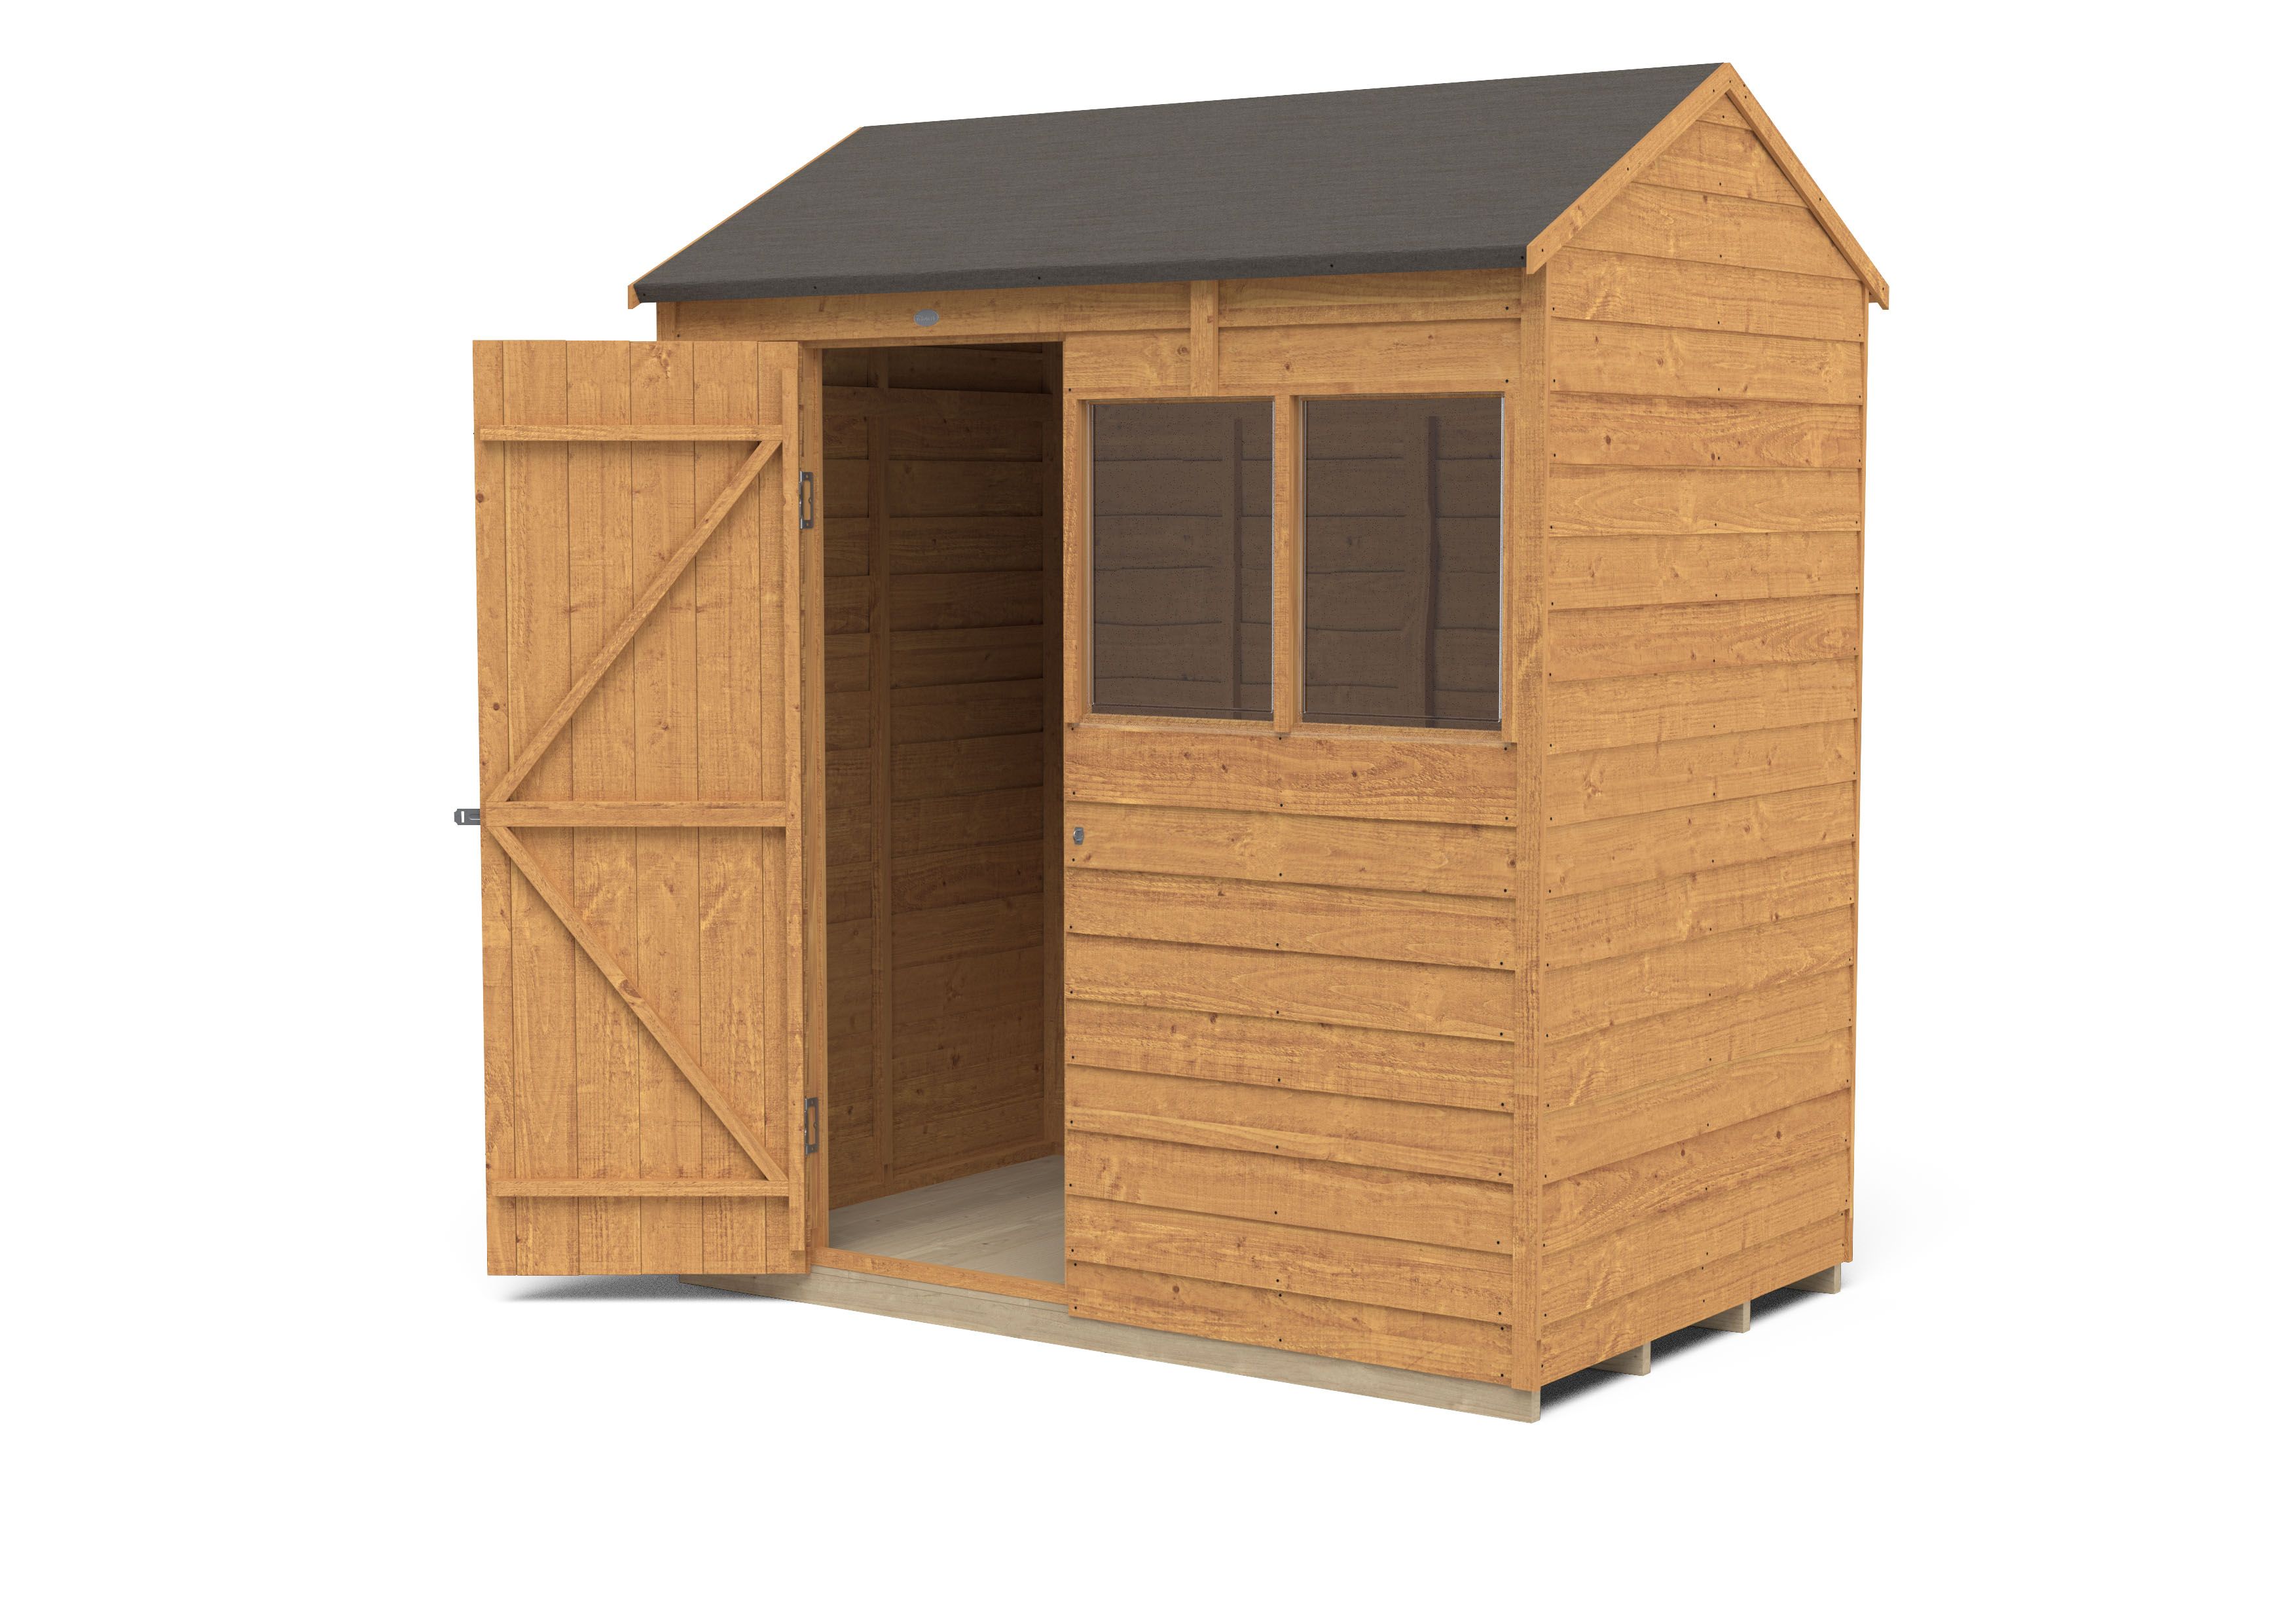 Forest Garden Overlap 6x4 ft Reverse apex Wooden Dip treated Shed with floor & 2 windows (Base included) - Assembly service included